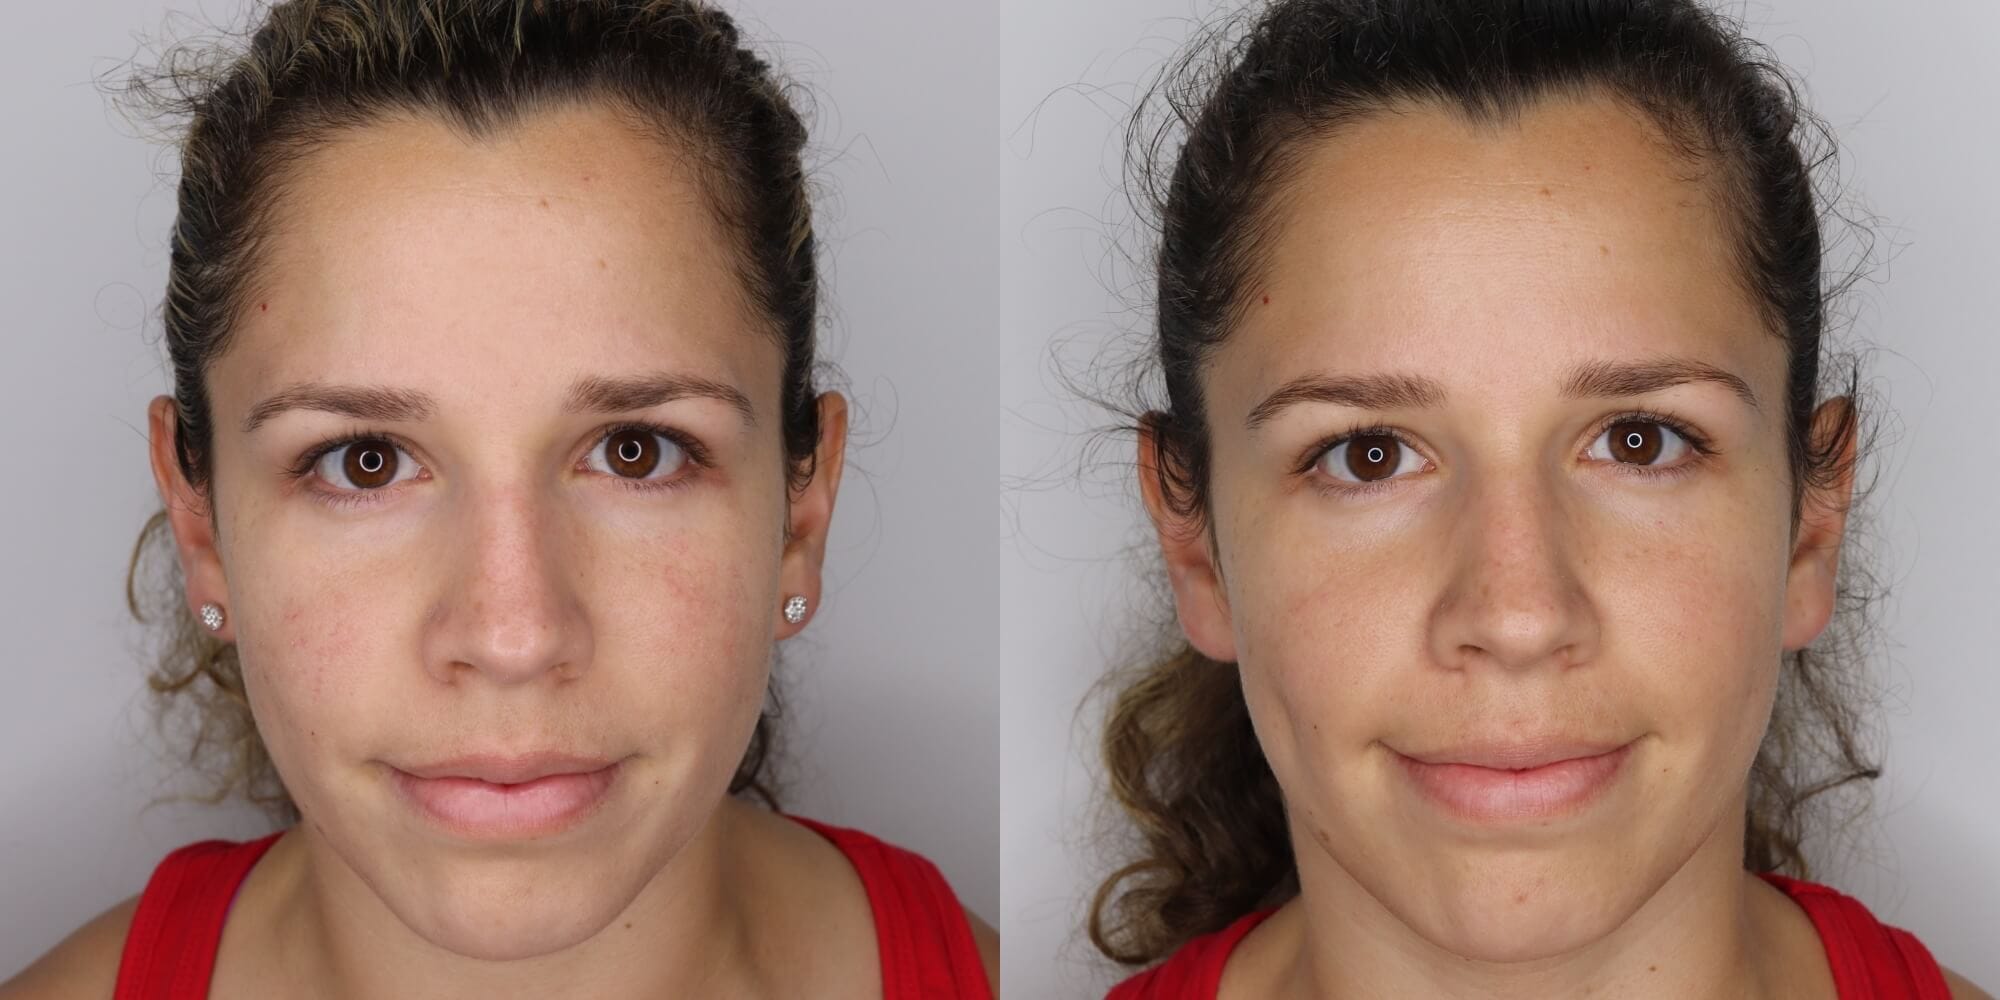 My wife's skin before (left) and after (right) using red light therapy for a few weeks.